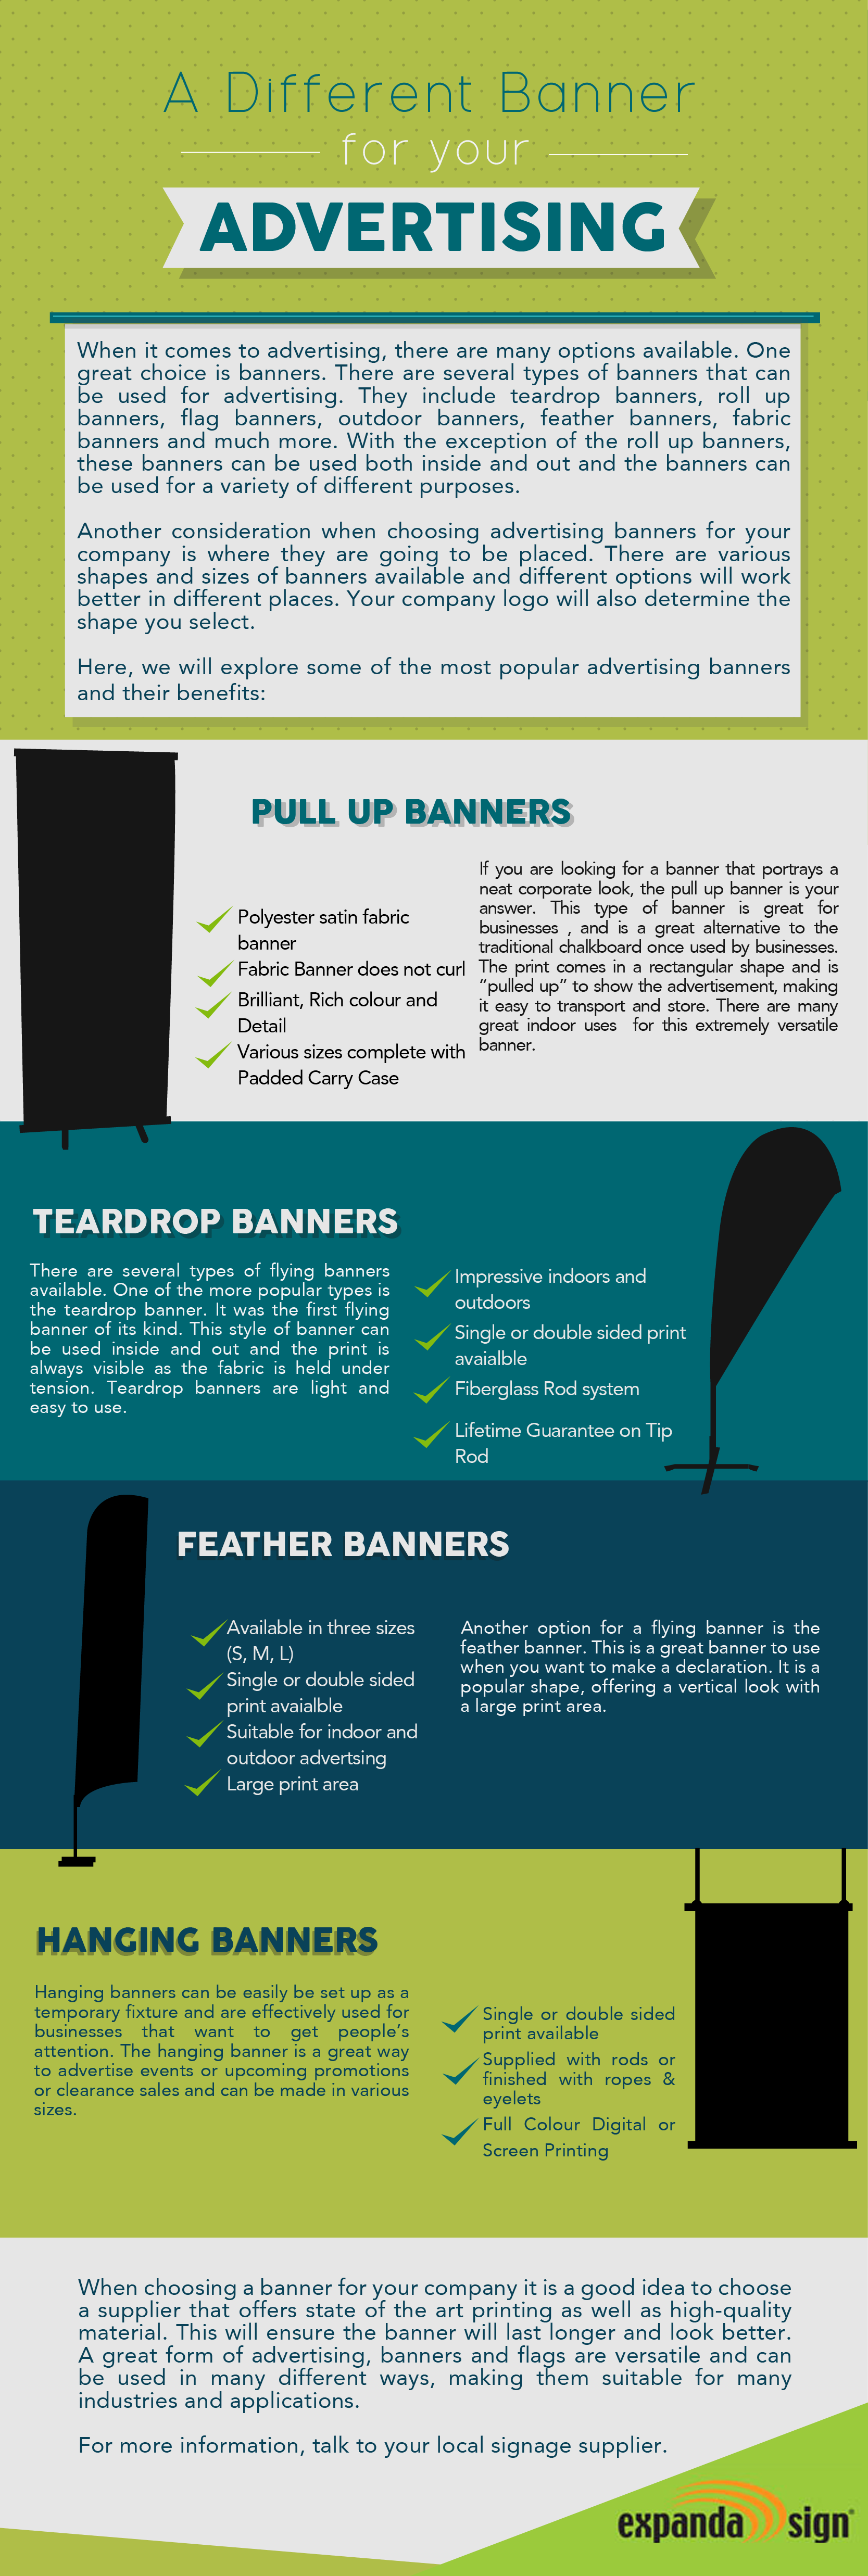 An infographic covering the different banners to suit your advertising